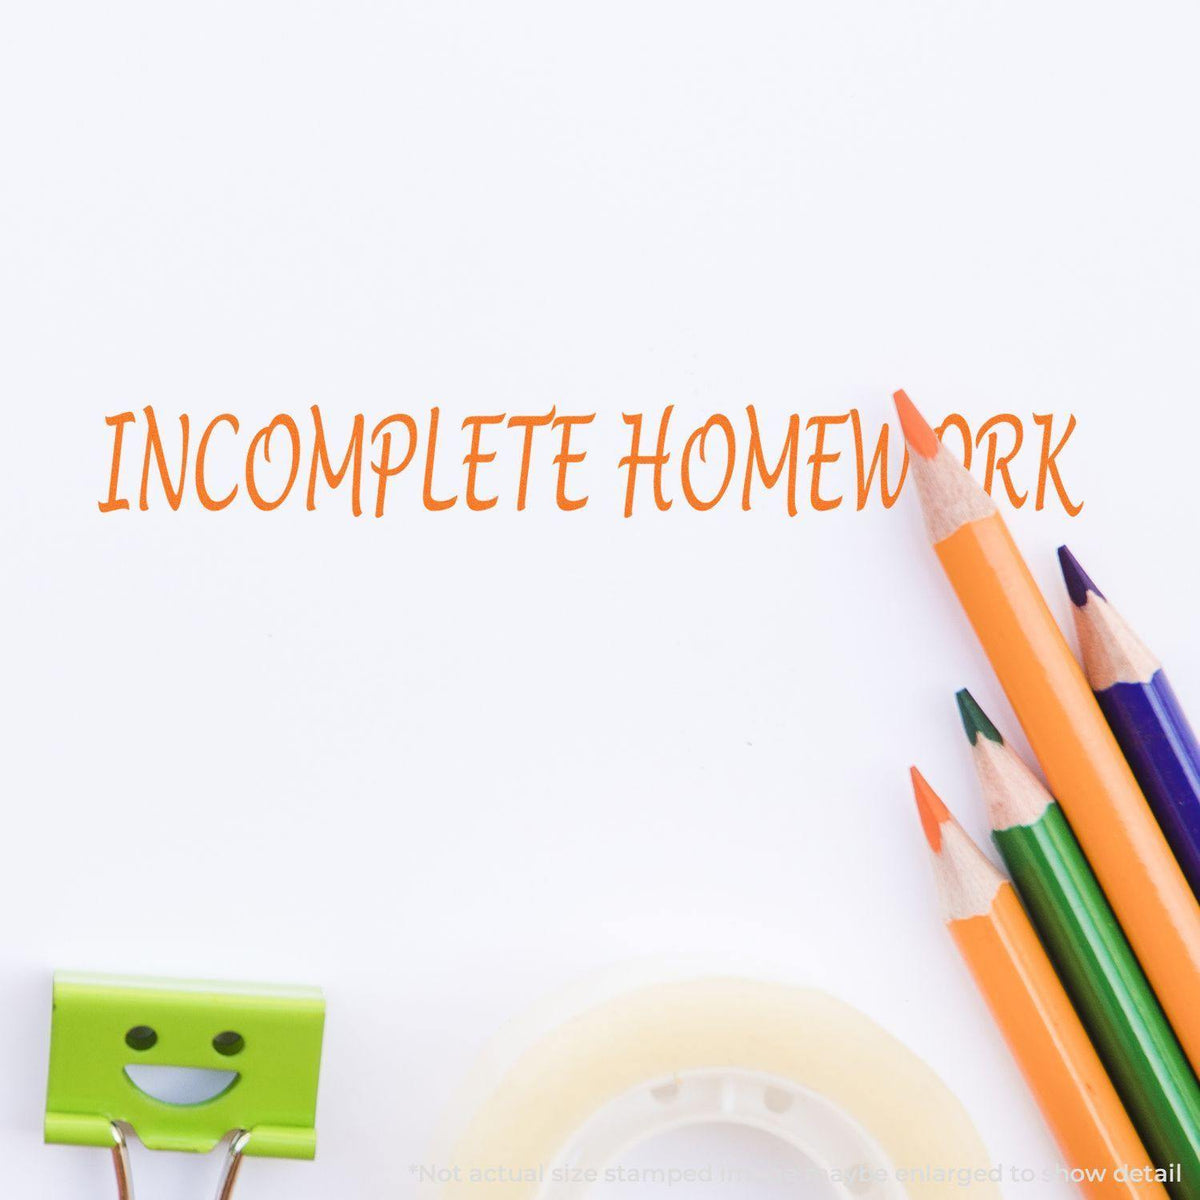 Large Incomplete Homework Rubber Stamp In Use Photo